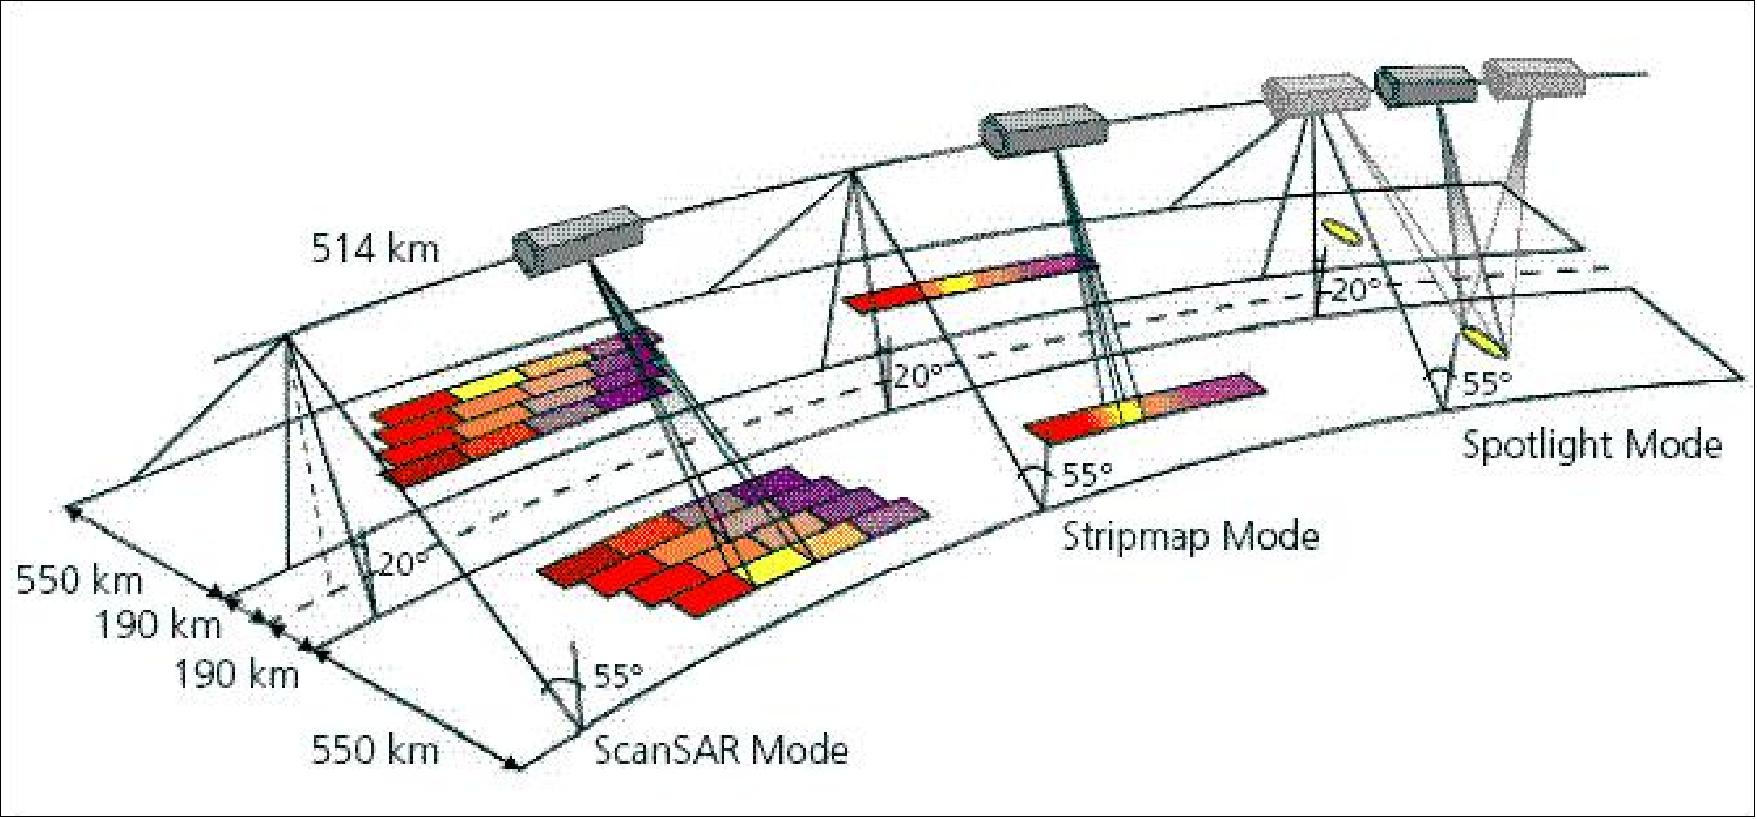 Figure 57: Overview of the TerraSAR-X scanning modes (image credit: DLR)